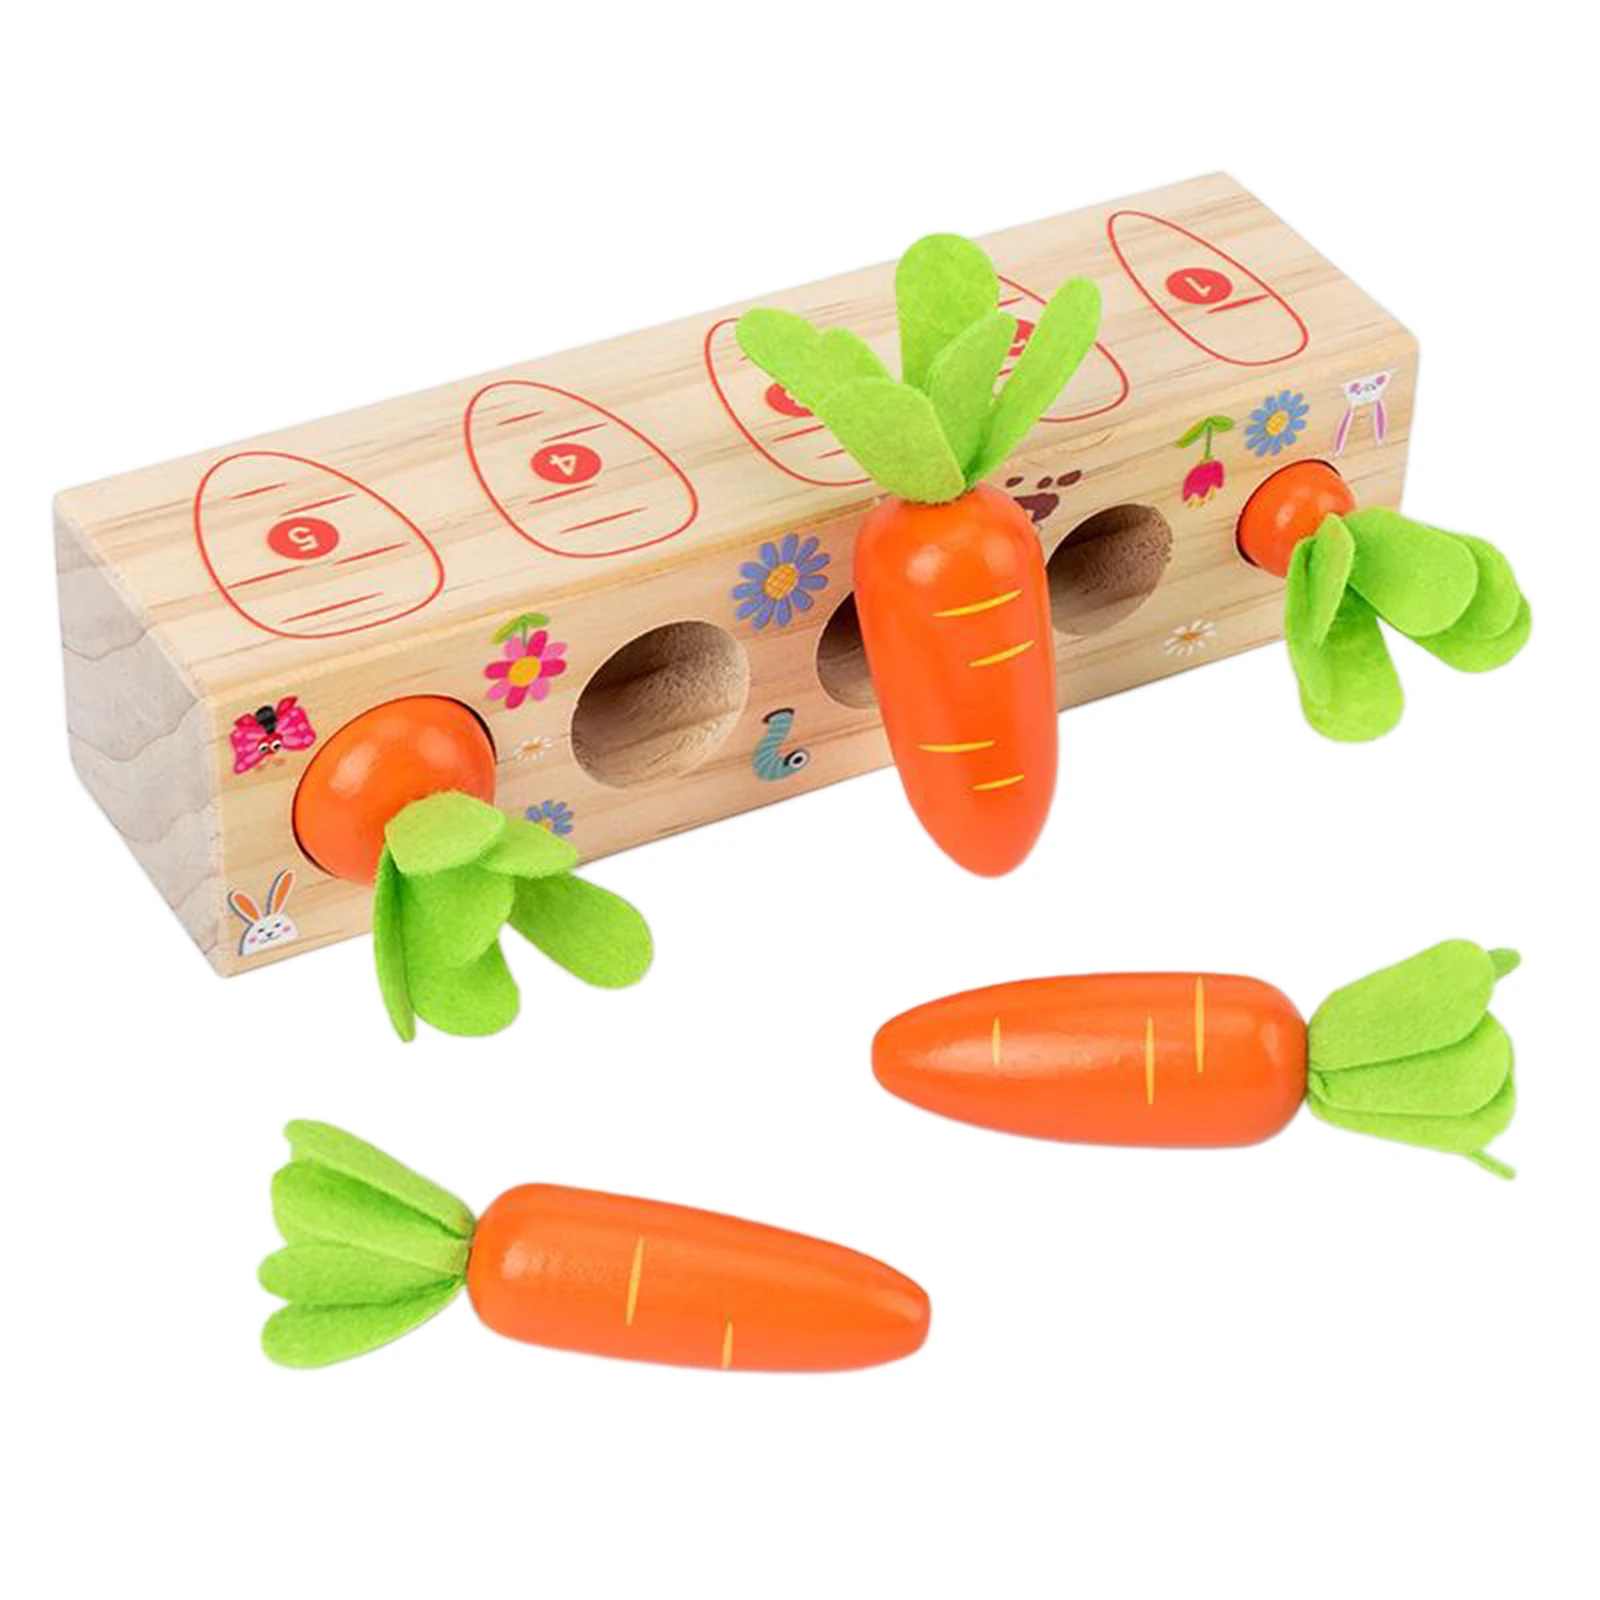 Wooden Carrot Harvest Game Wood Toys for Kids Matching Puzzle Memory Match Game for Developing Fine Motor Skill for Boys